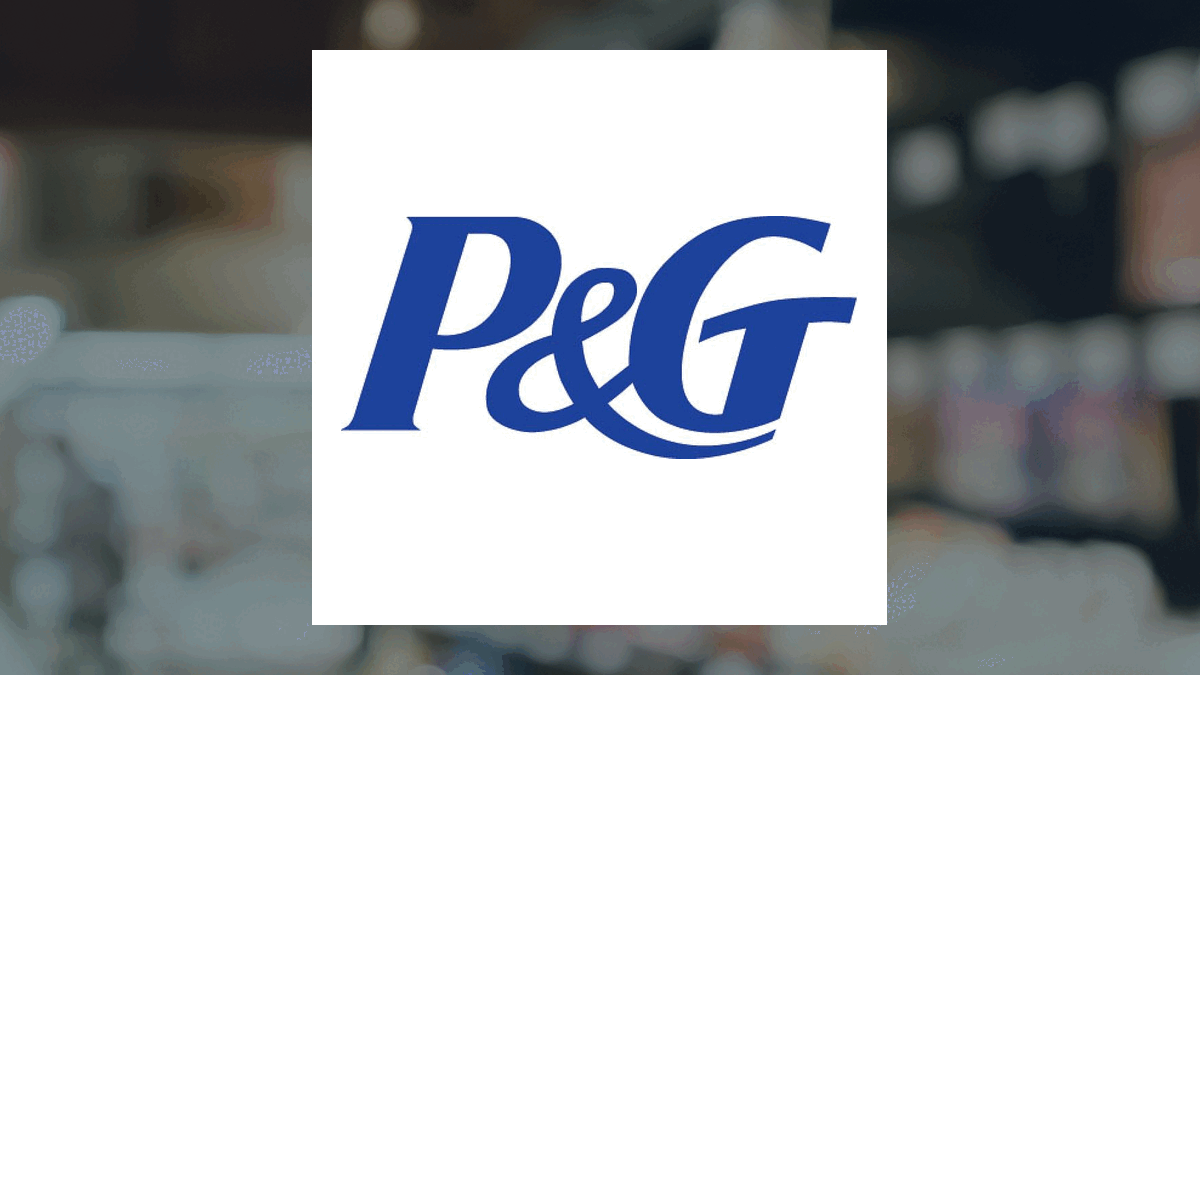 Procter & Gamble logo with Consumer Staples background